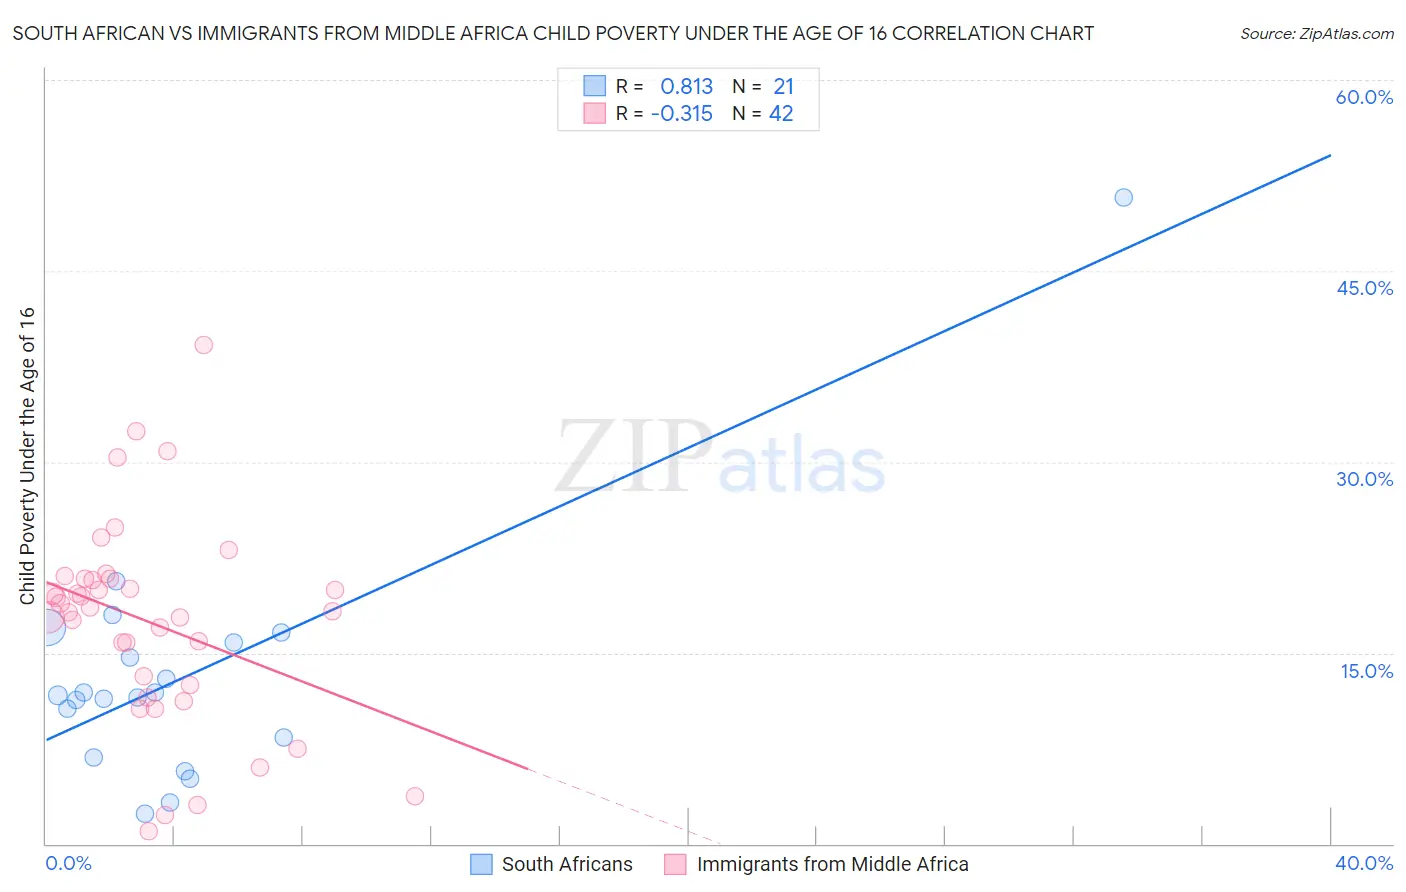 South African vs Immigrants from Middle Africa Child Poverty Under the Age of 16